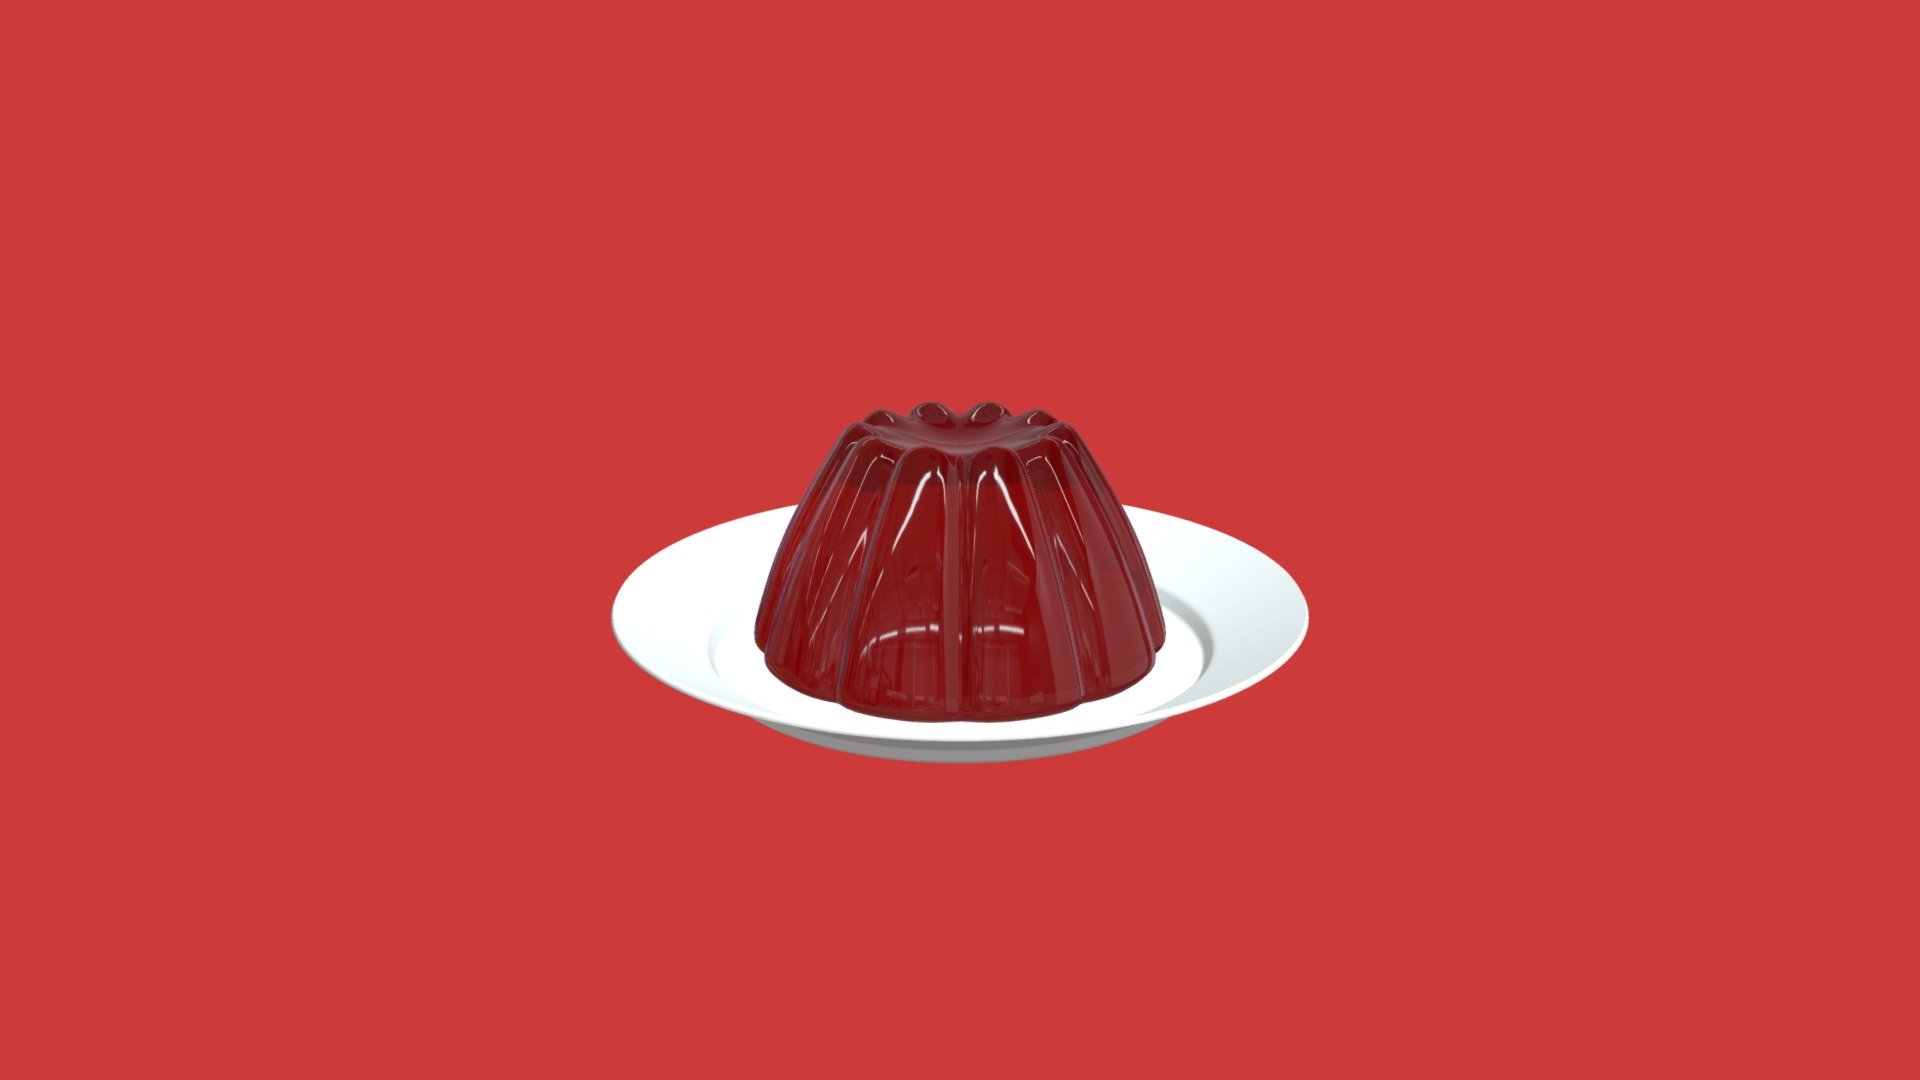 This model of jelly on the plate is made in Blender. This delicious red jelly can be used in 3d projects 3d model